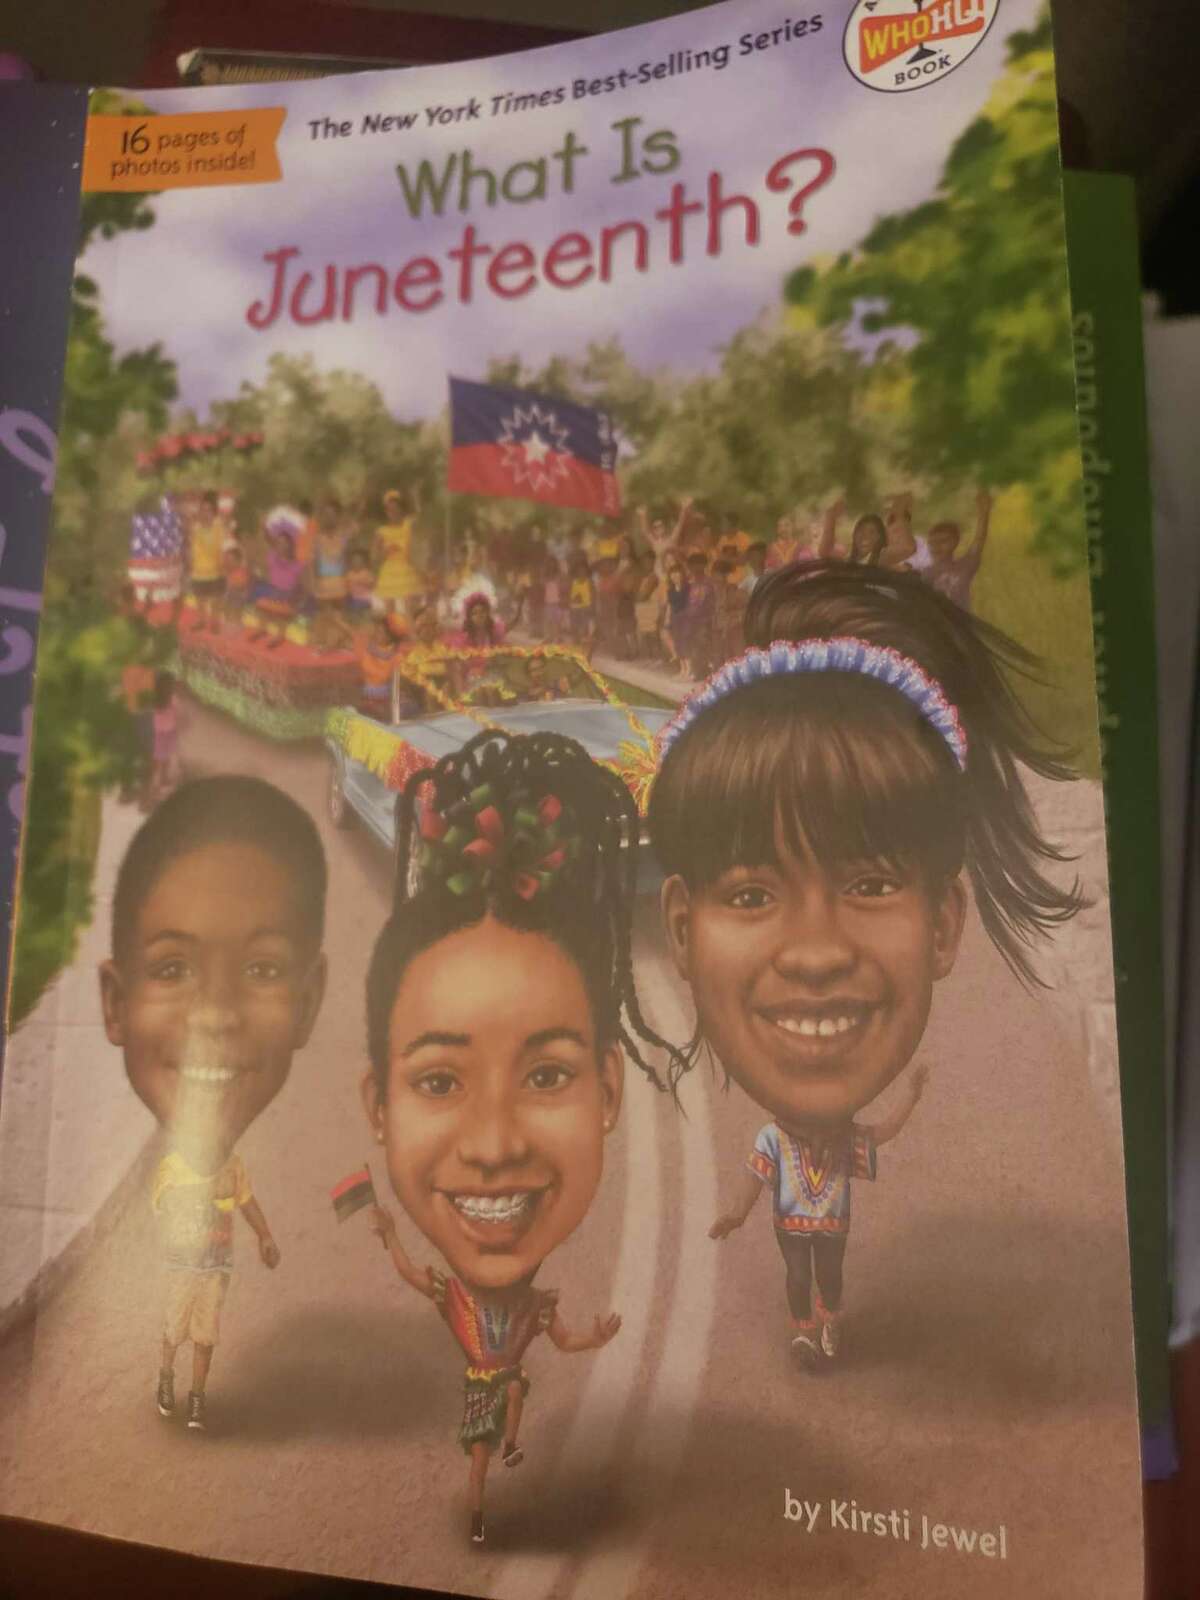 Our Culture is Beautiful is holding a Juneteenth celebration at Tequanna's Soul Food and Sweets on Main Street, Torrington, at 3:30 p.m. June 19.